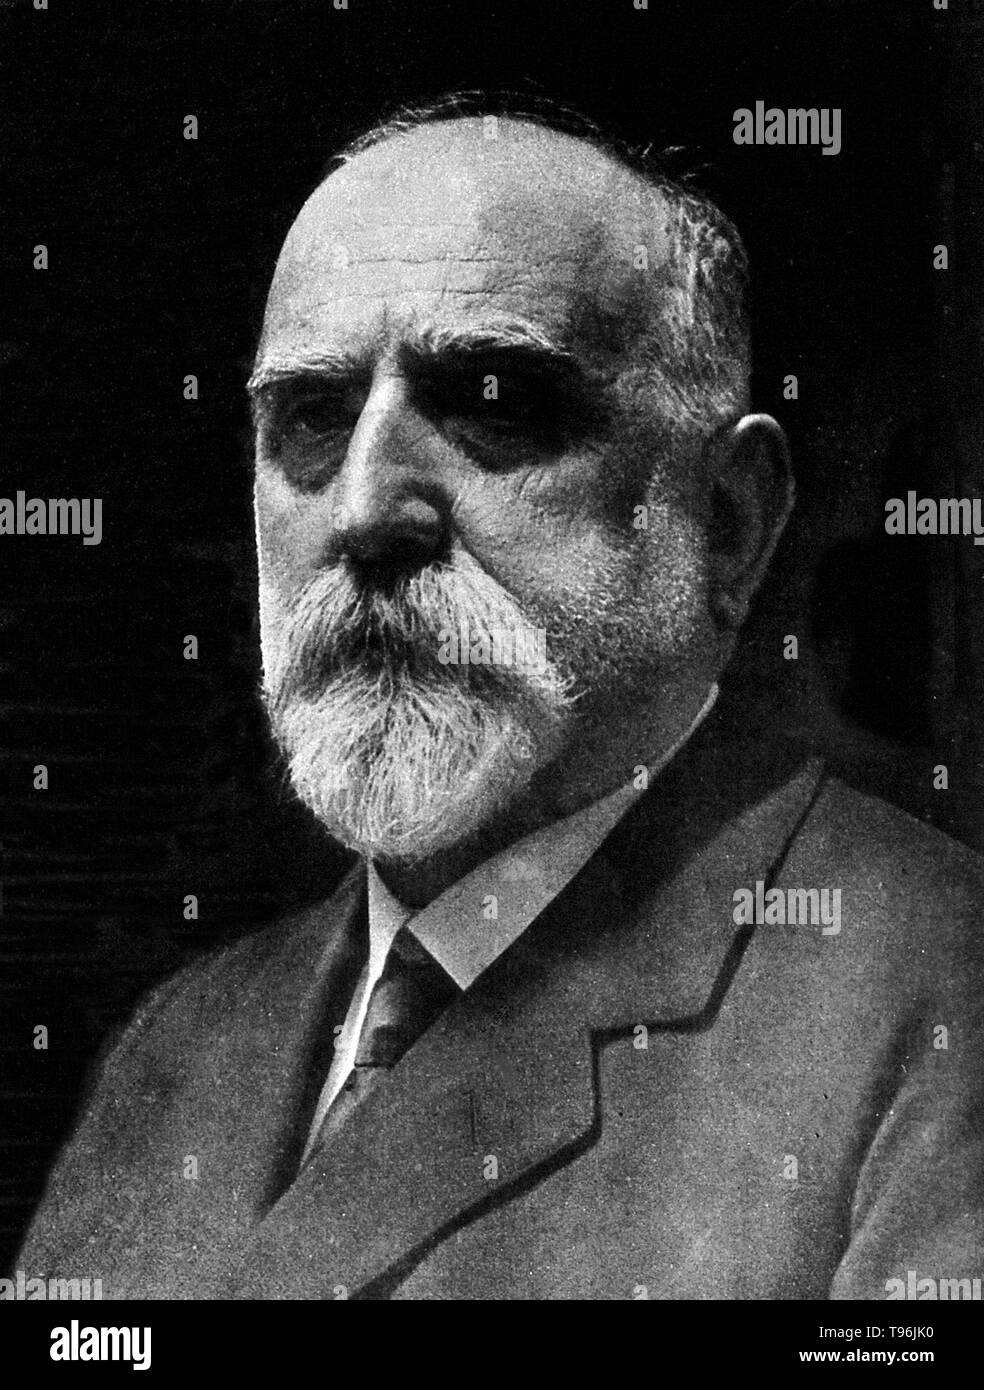 Jaume Ferran i Clua (1851- 1929) was a Spanish bacteriologist and sanitarian, contemporary of Koch, and said by his fellows to have made some of the discoveries attributed to Koch. As early as 1885, he wrote on immunization against cholera. In 1893, his work on this subject was translated into French with the title L'Inoculation préventive contre le Cholera. Tuberculosis is another disease in which Ferran was always deeply interested. Some of his ideas on the transmission and virulence of tuberculosis are revolutionary. No photographer credited, undated. Stock Photo